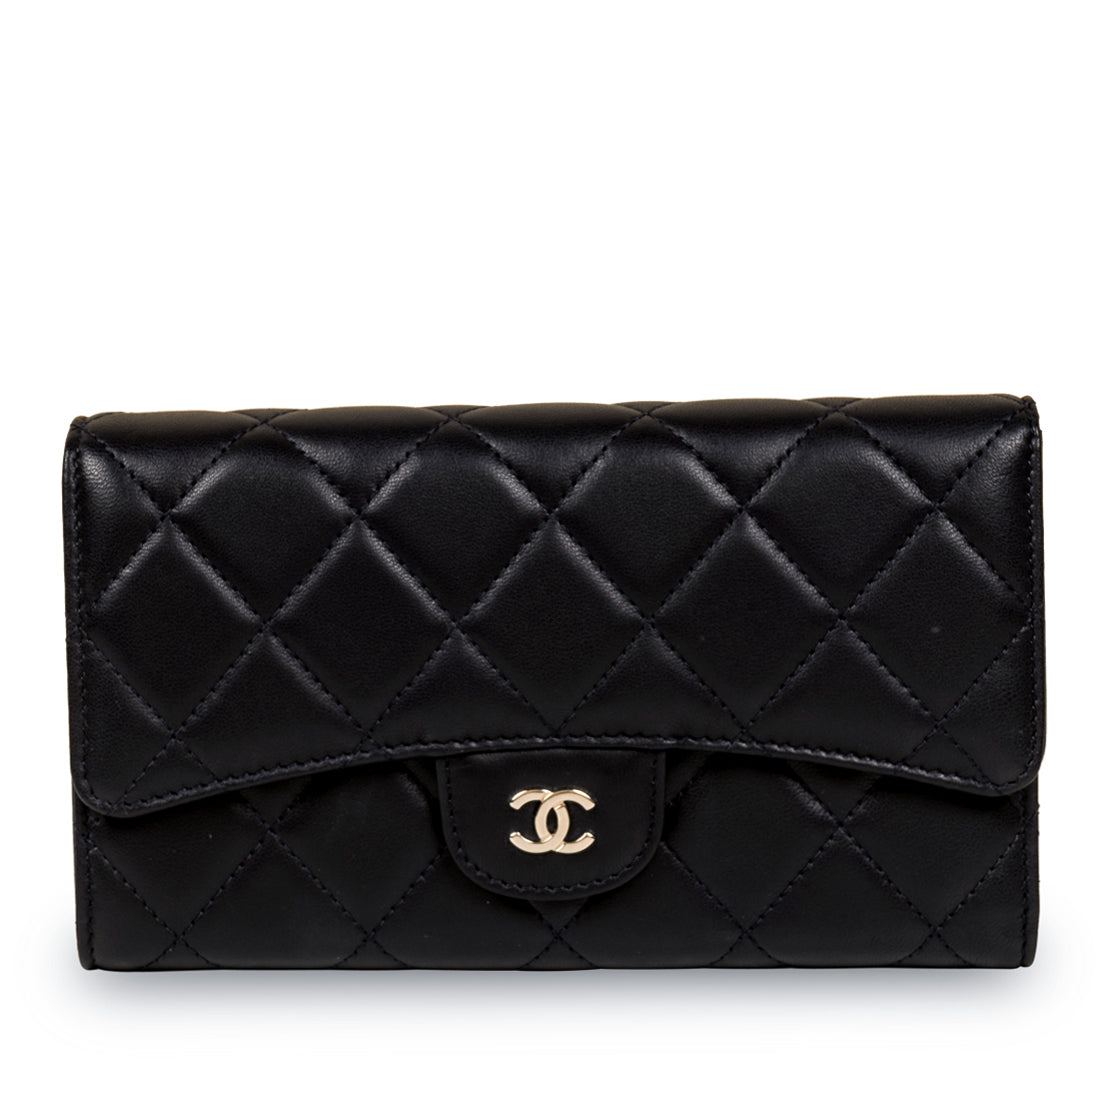 Chanel - Classic Flap Wallet - Navy Blue - Pre-Loved | Bagista